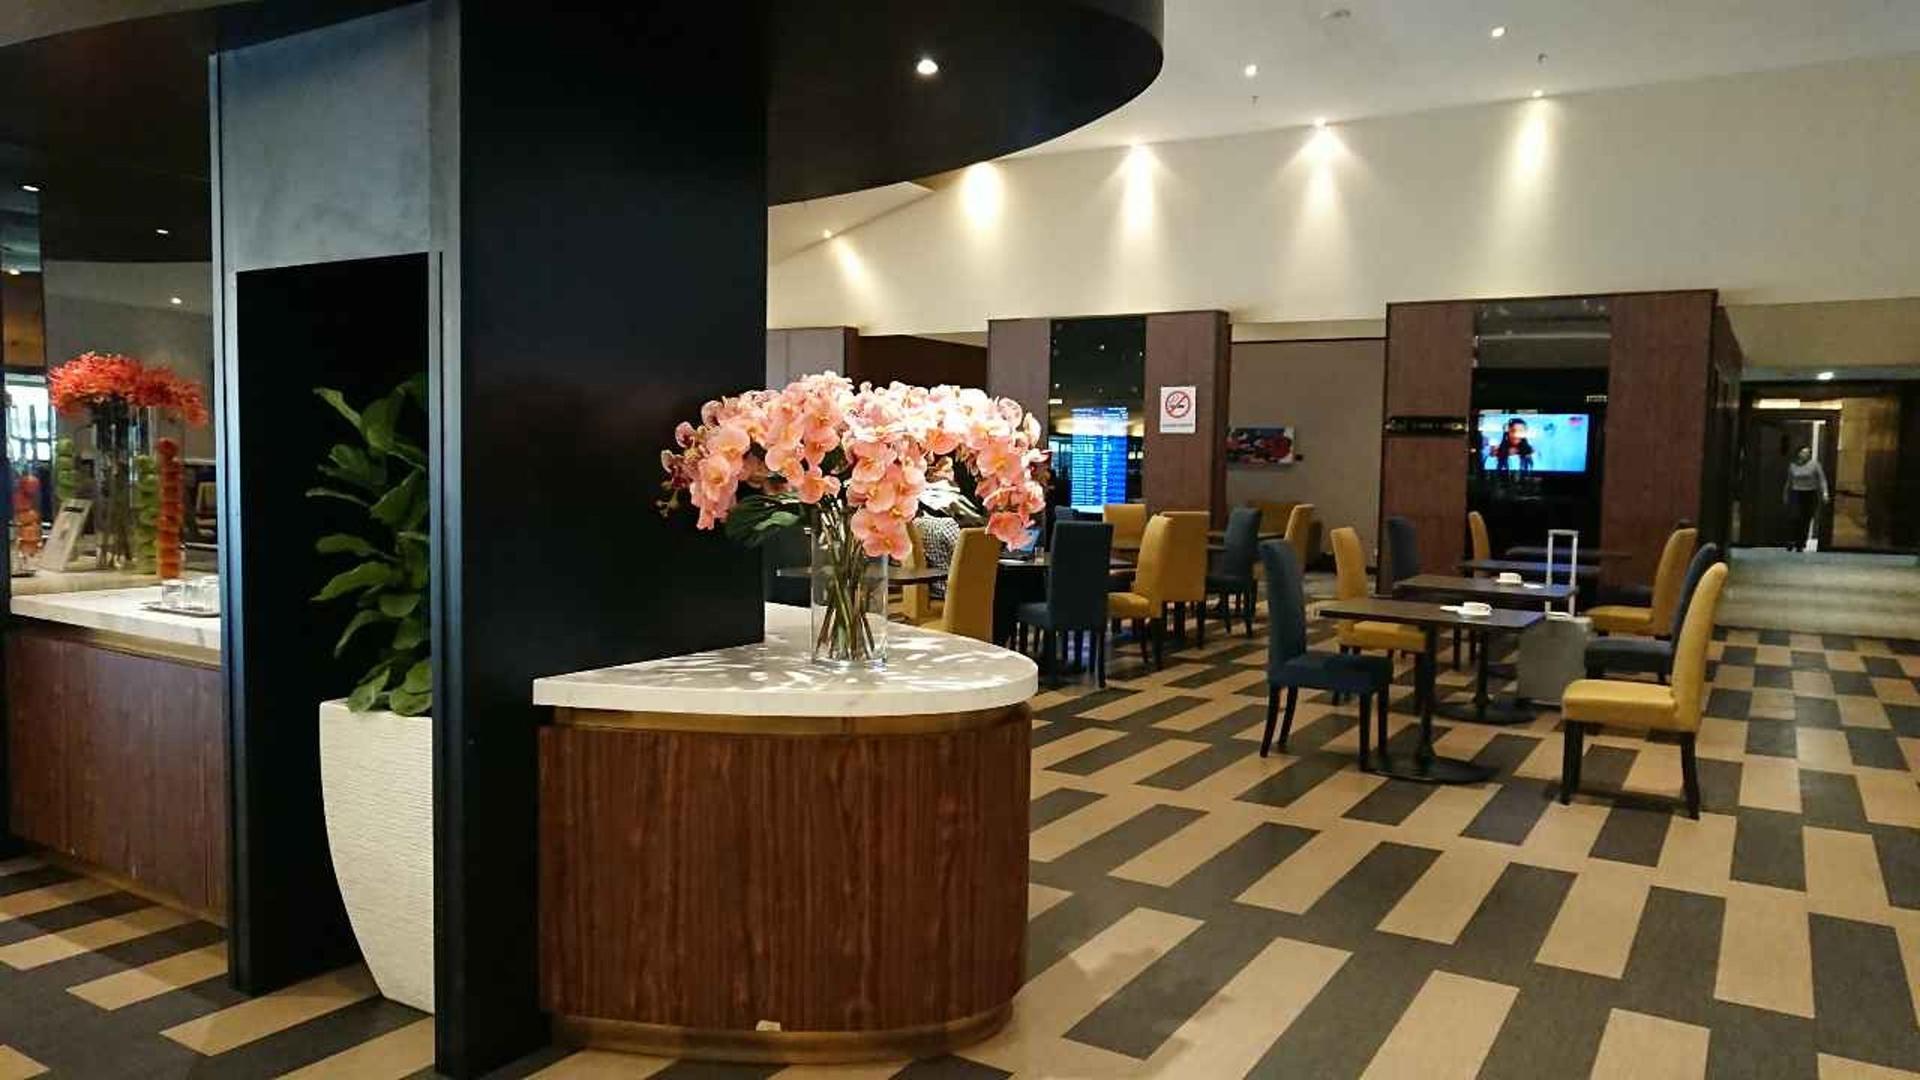 Malaysia Airlines Golden Business Class Lounge image 4 of 27